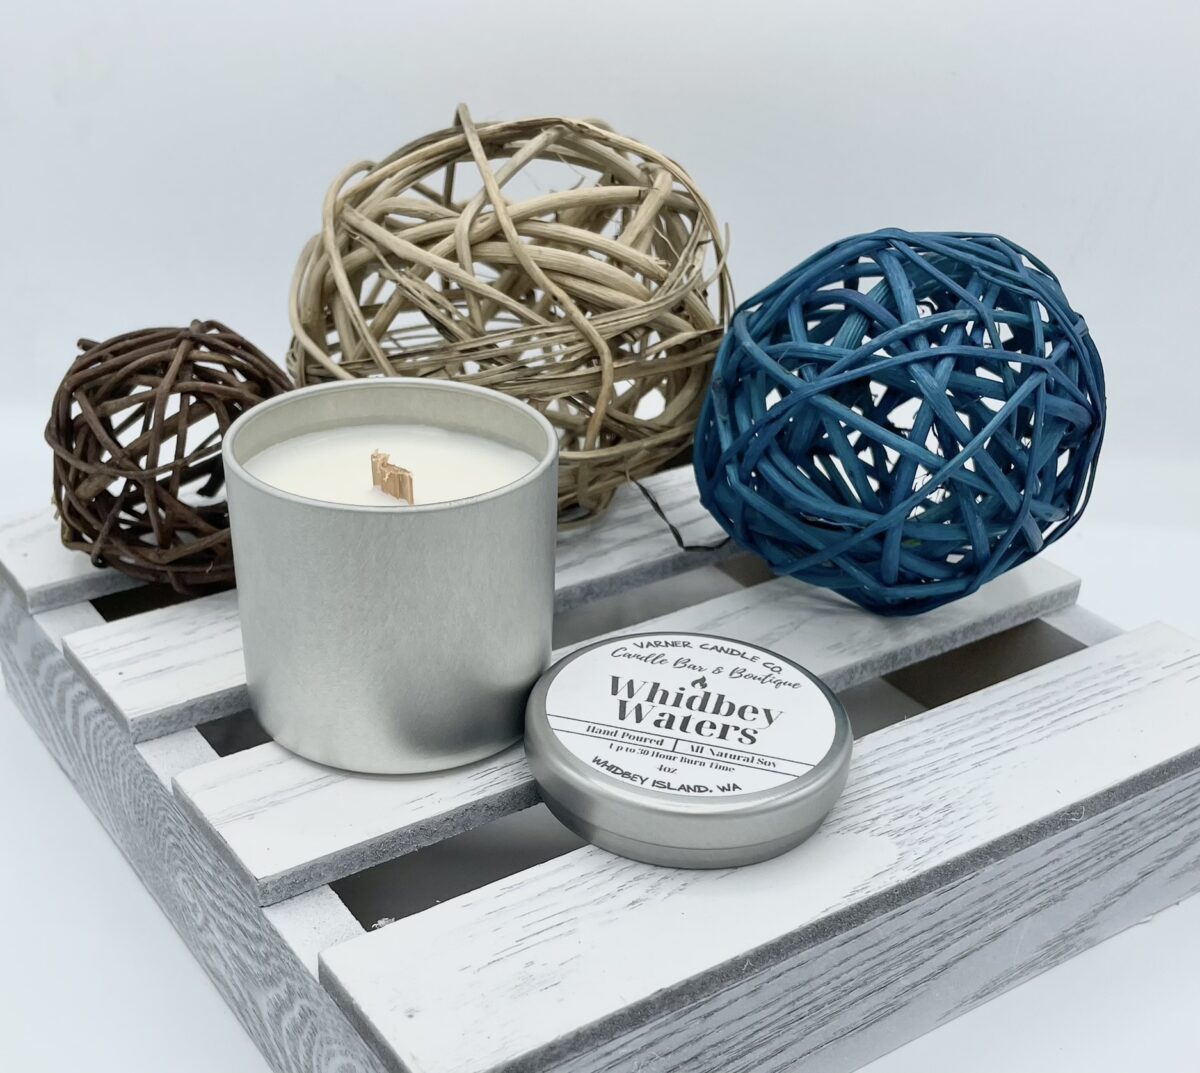 Whidbey Waters (Lavender Driftwood) scented soy candle in 4oz silver tin container with wooden wick